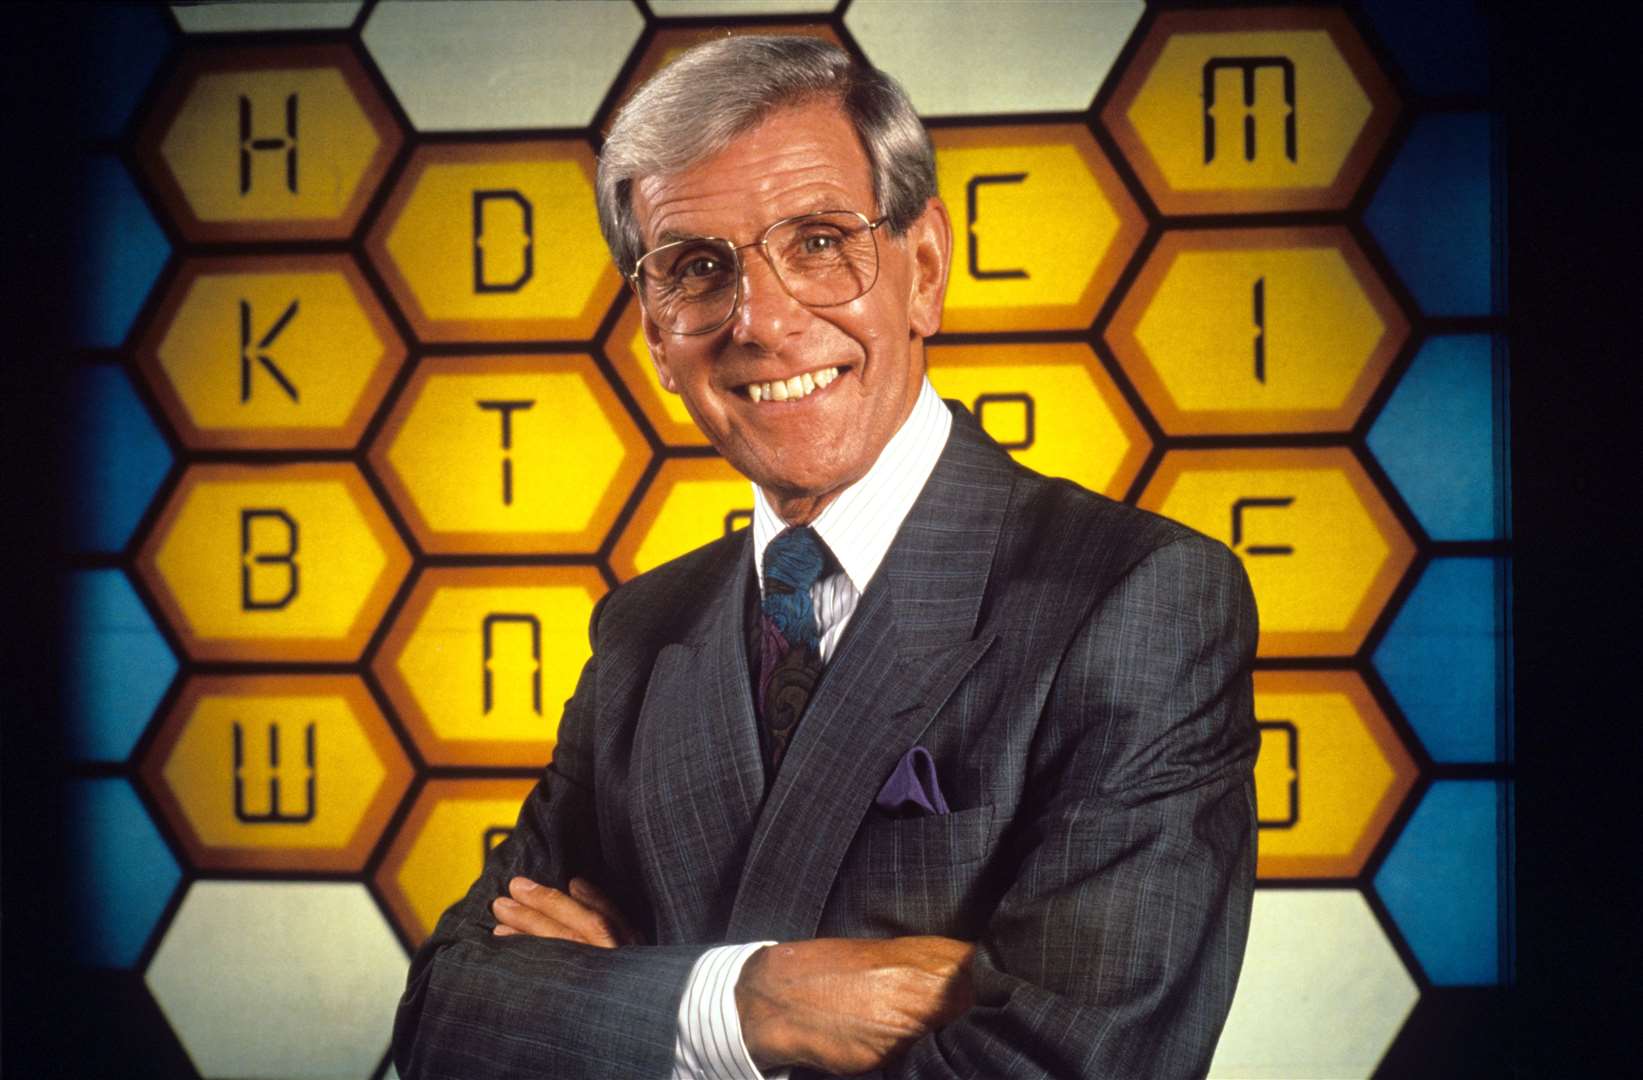 Former Ashford schoolboy Bob Holness presented Blockbusters for 11 years. Photo: ITV/Rex Features